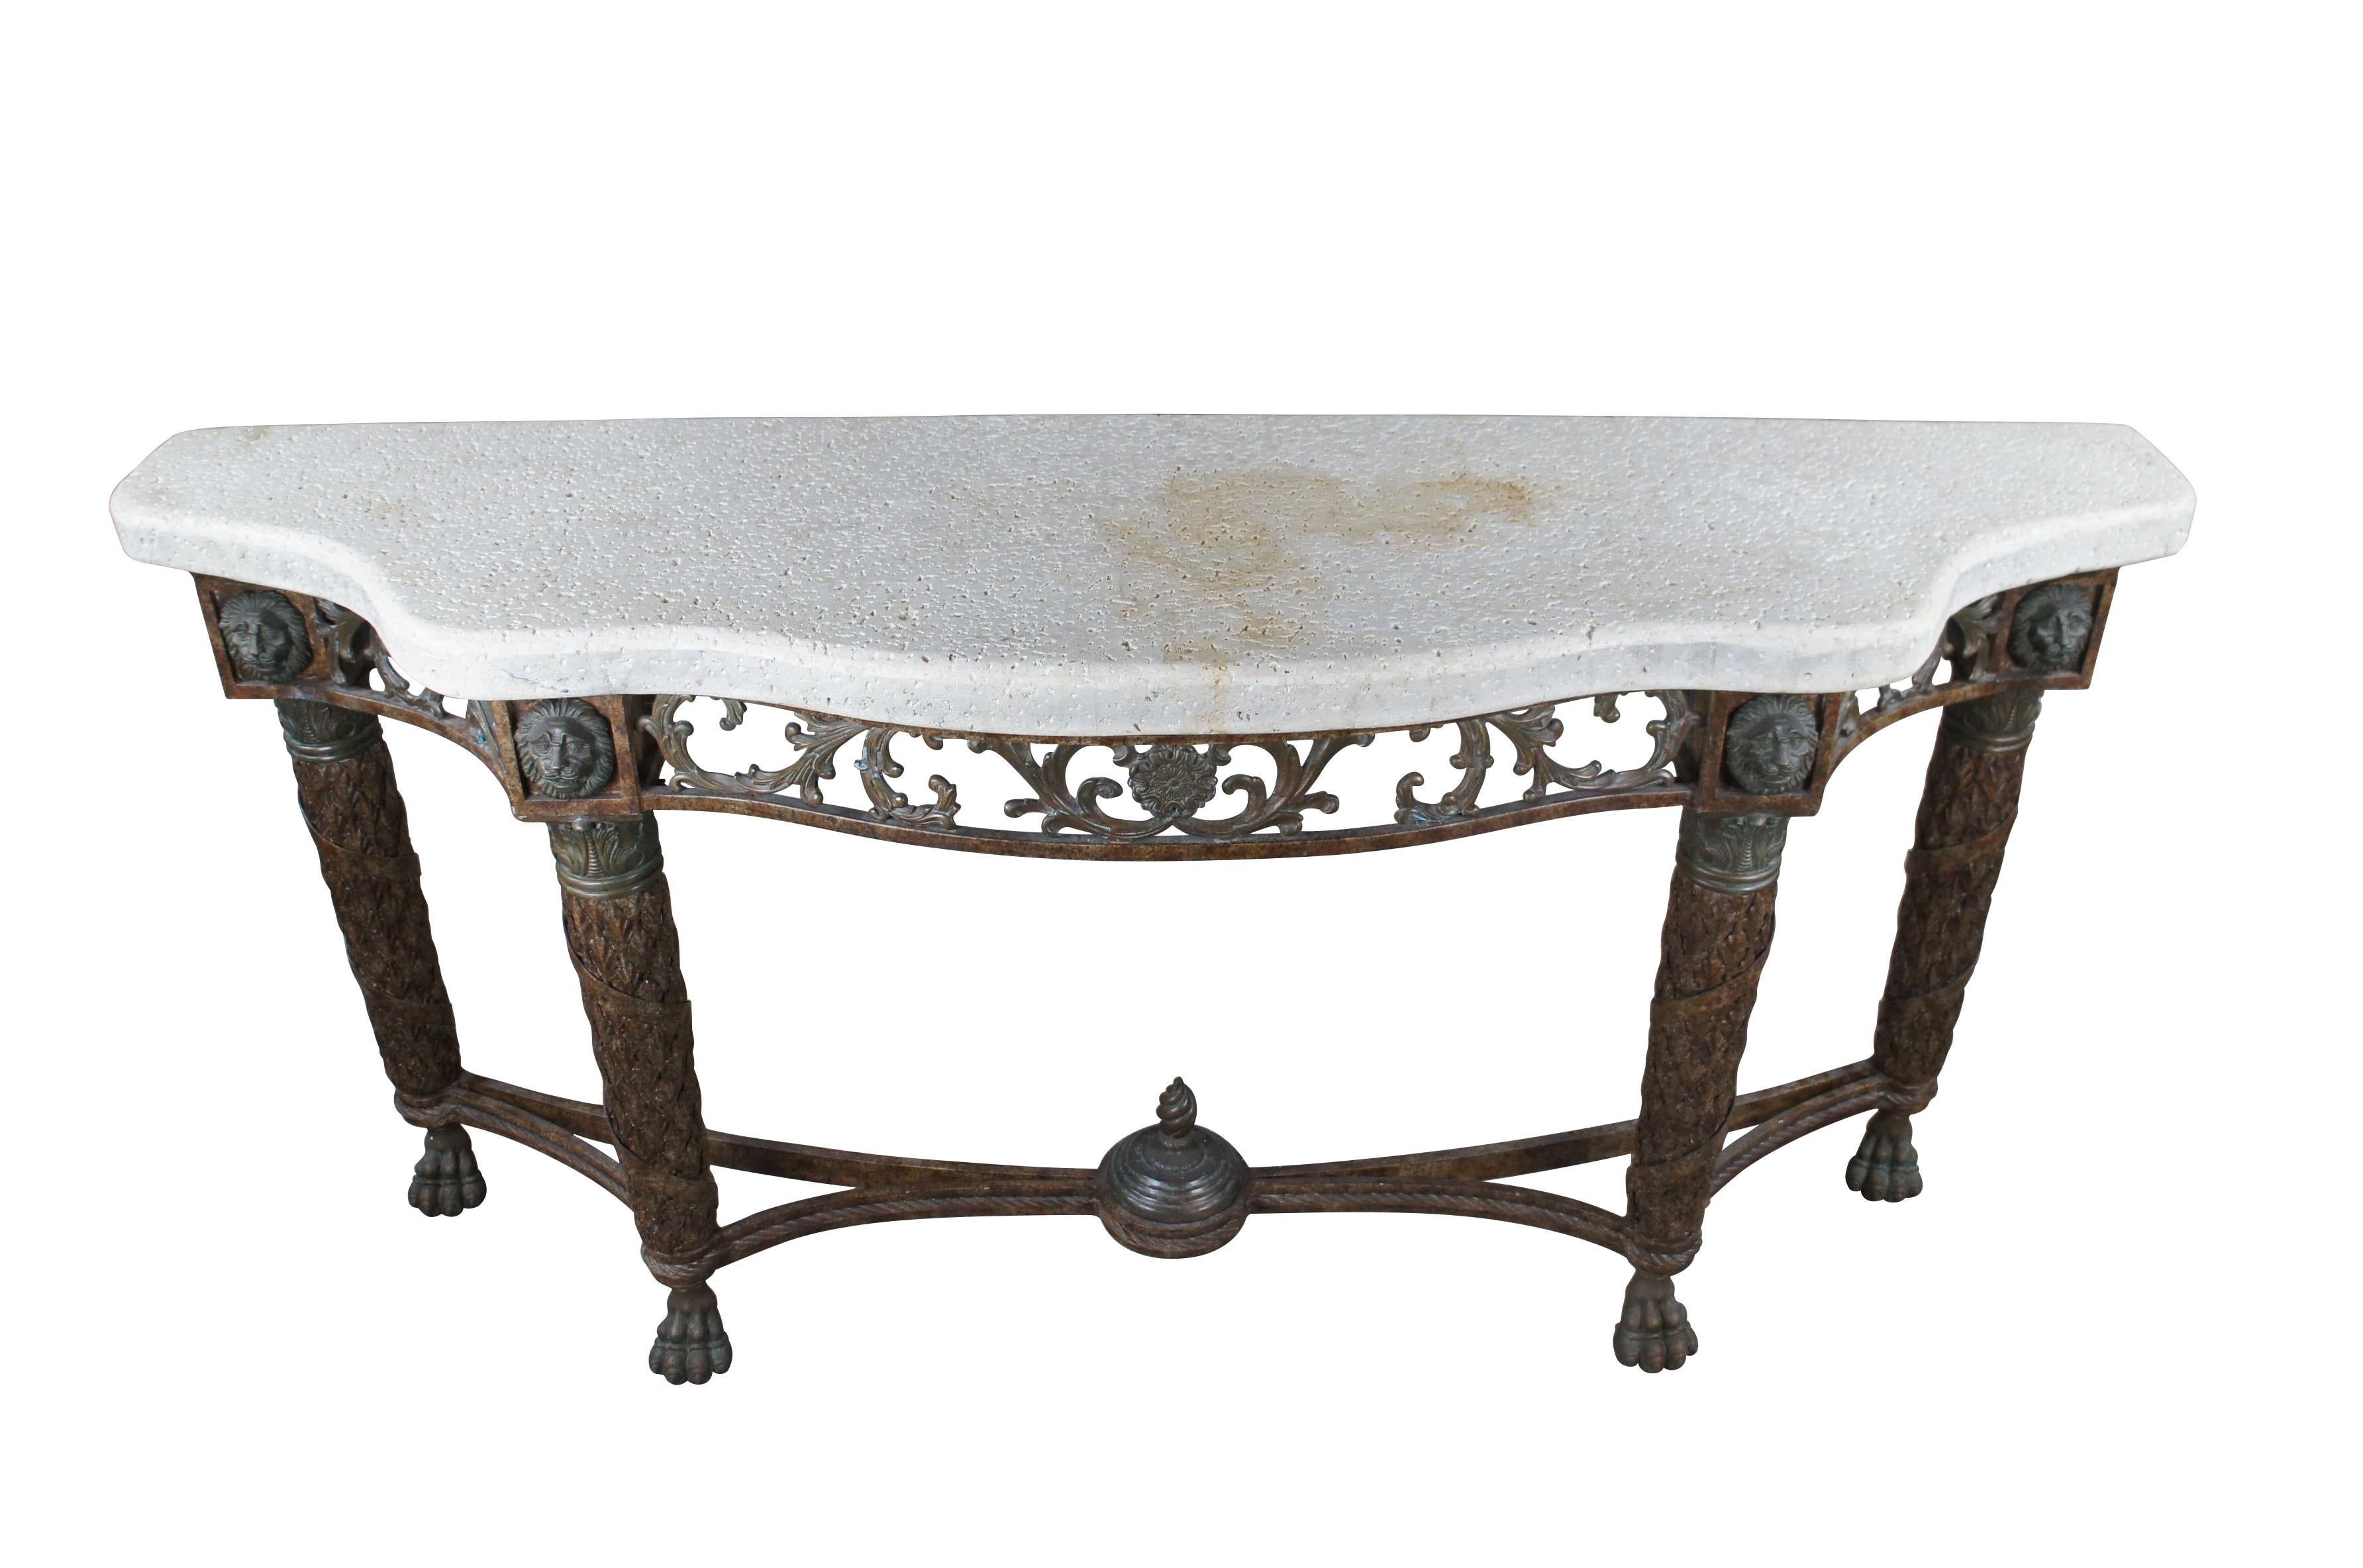 An exceptional late 20th century French Louis XVI inspired serpentine console table / sideboard by Maitland Smith.  Made from iron with a porous stone top.  The robust table is supported by four tapered legs, covered in acanthus leaves with twisted